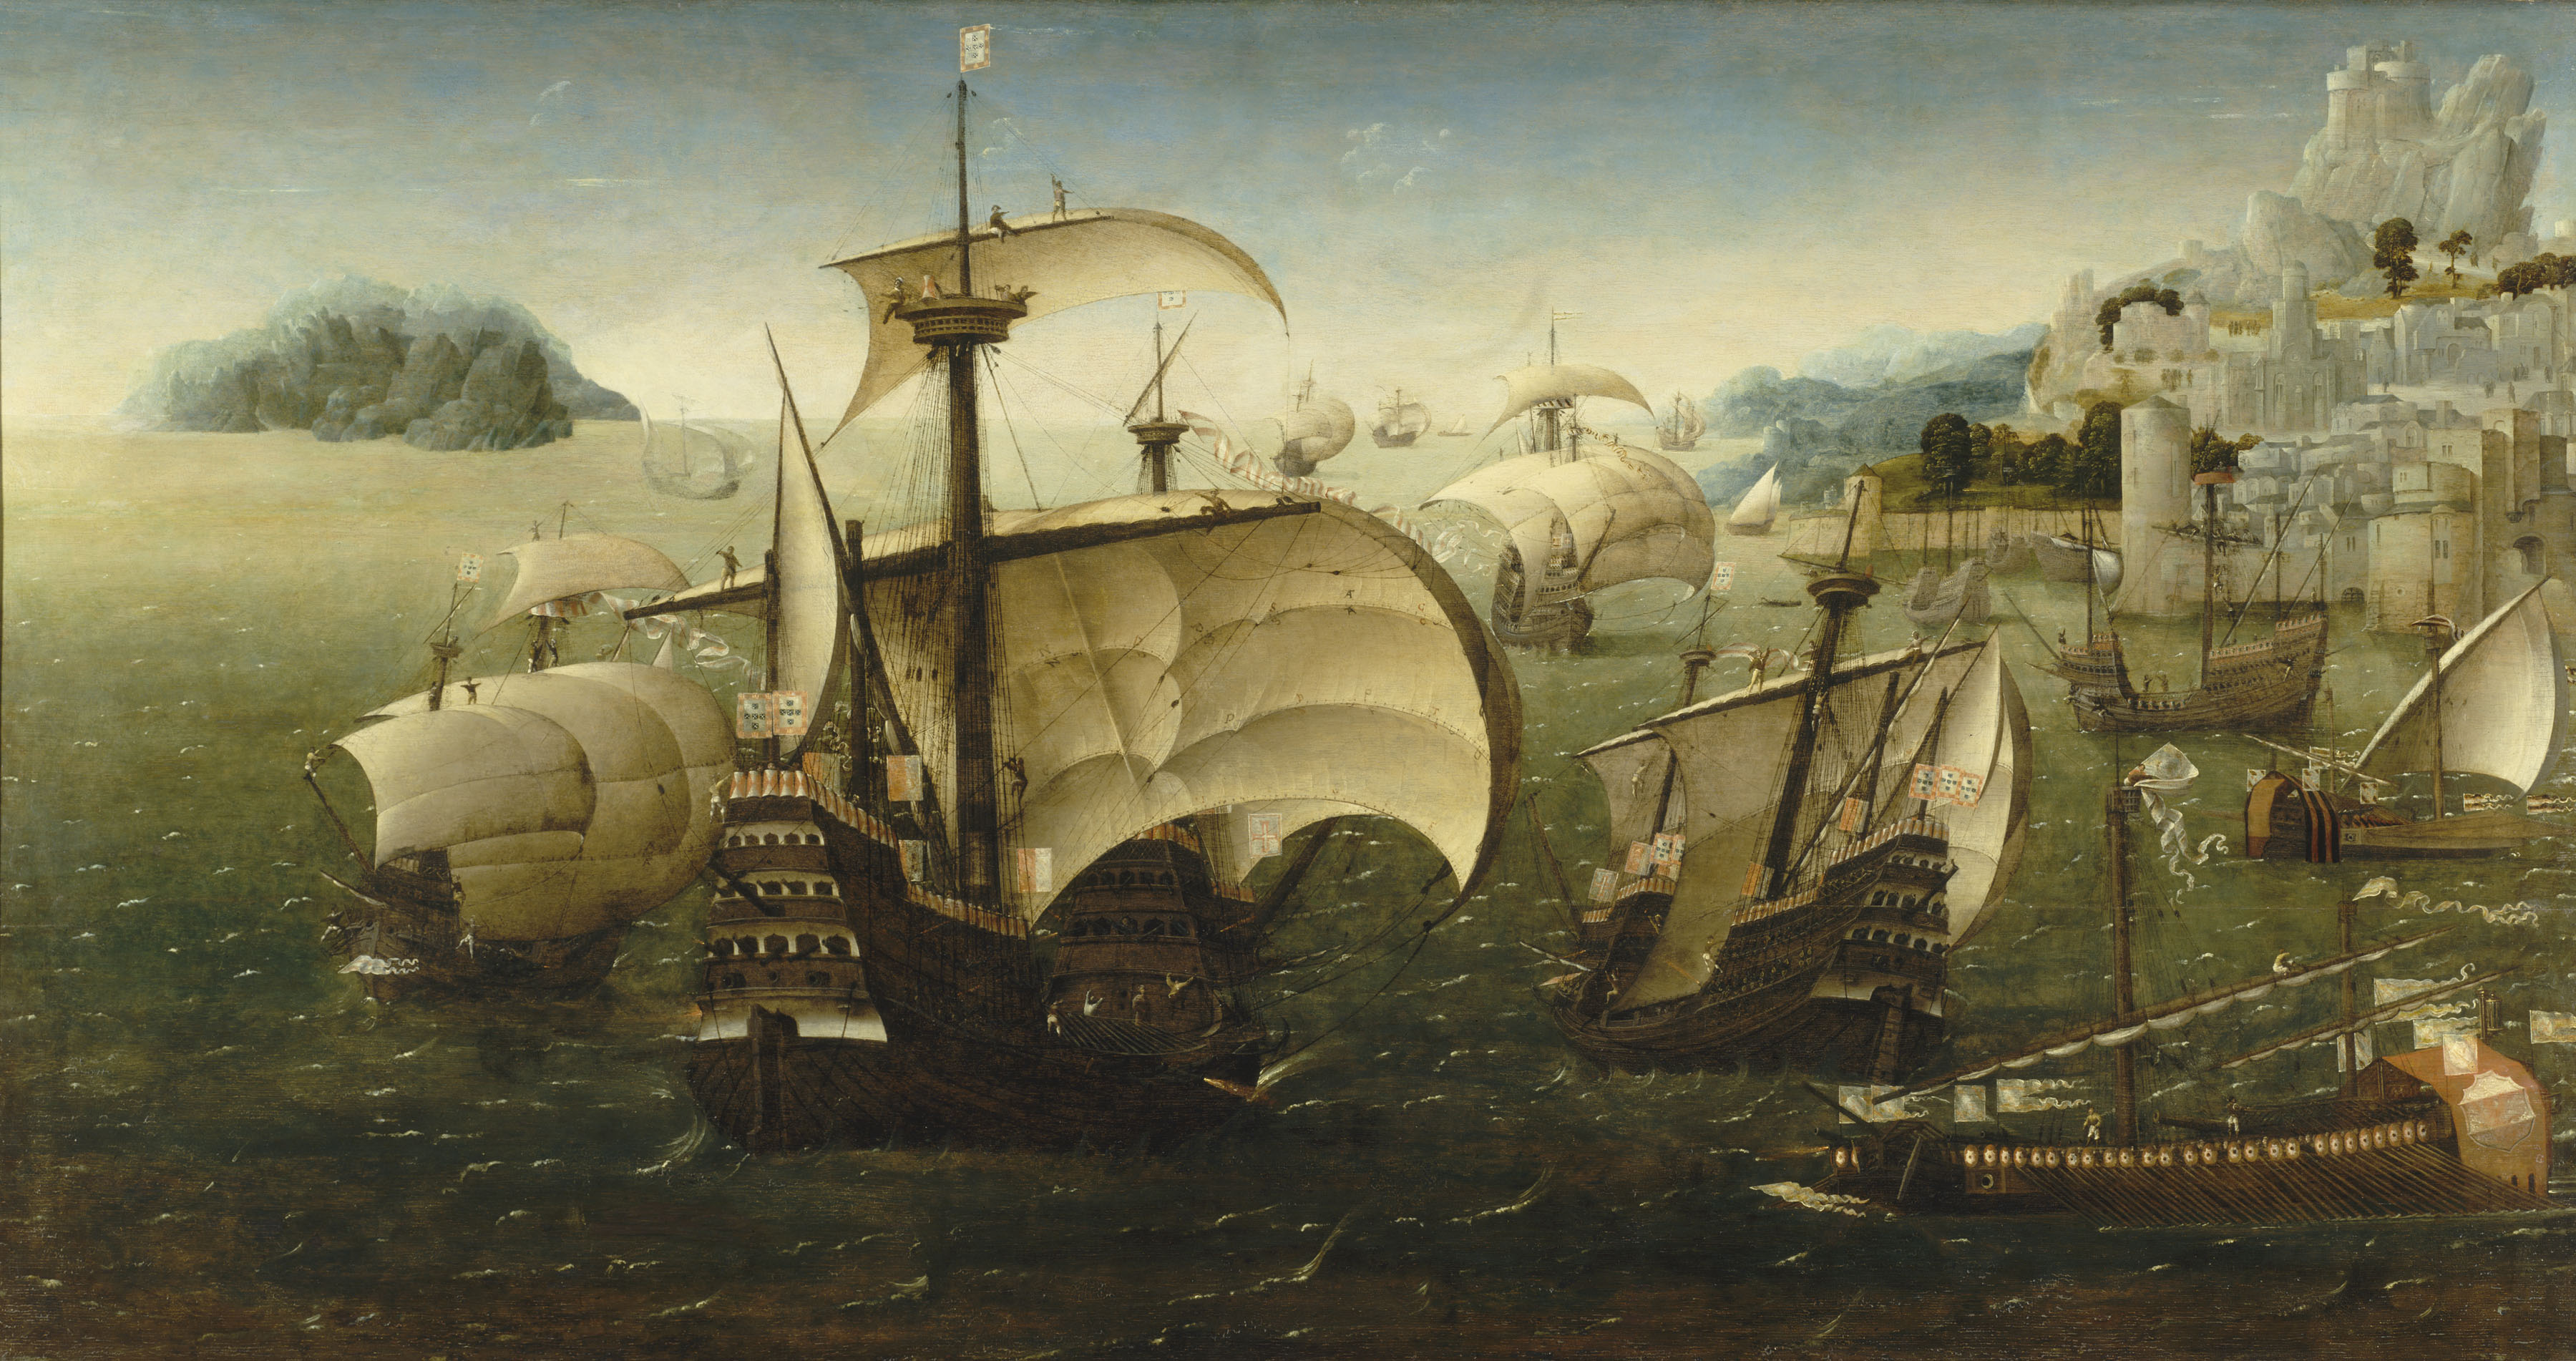 This is one of the very few contemporary paintings of ships of the first half of the 16th century, and one of the best such representations of the first generation of ocean-going merchantmen. It is the object of much speculation by scholars and is thought to show the carrack 'Santa Catarina de Monte Sinai' bringing the Infanta Beatriz, second daughter of King Manuel of Portugal, to Villefranche for her marriage to Charles III, Duke of Savoy, in 1521. The Portuguese carracks wearing Manuel's flags and emblems met Italian ships during the journey from Lisbon.